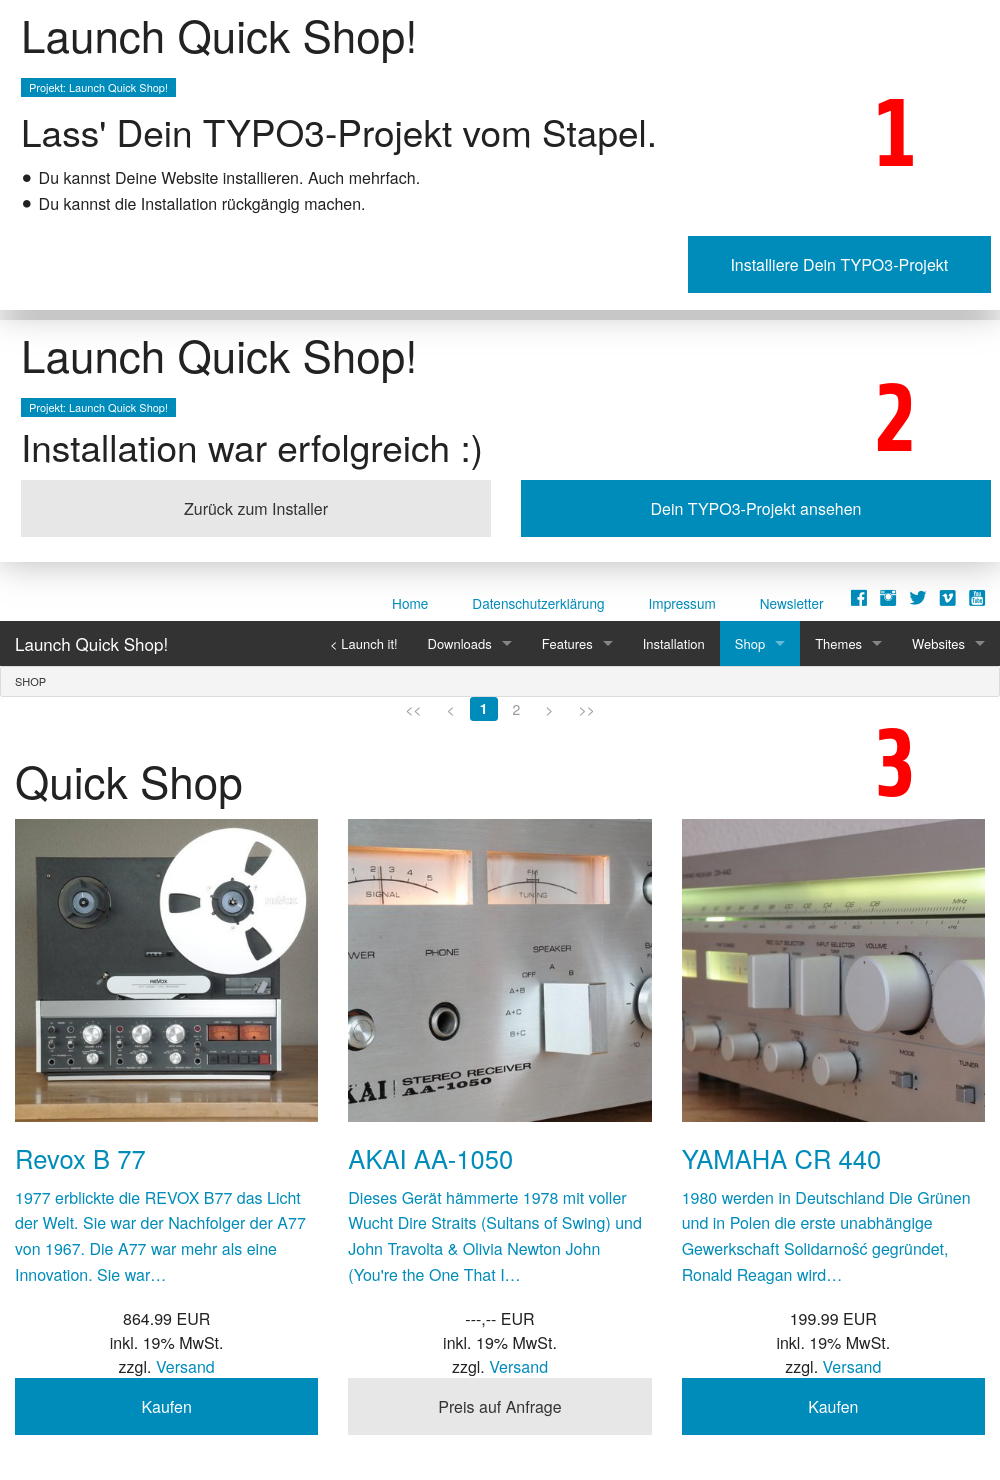 Launch Quick Shop! enables you, to install Caddy ready-to-use with some mouse clicks.